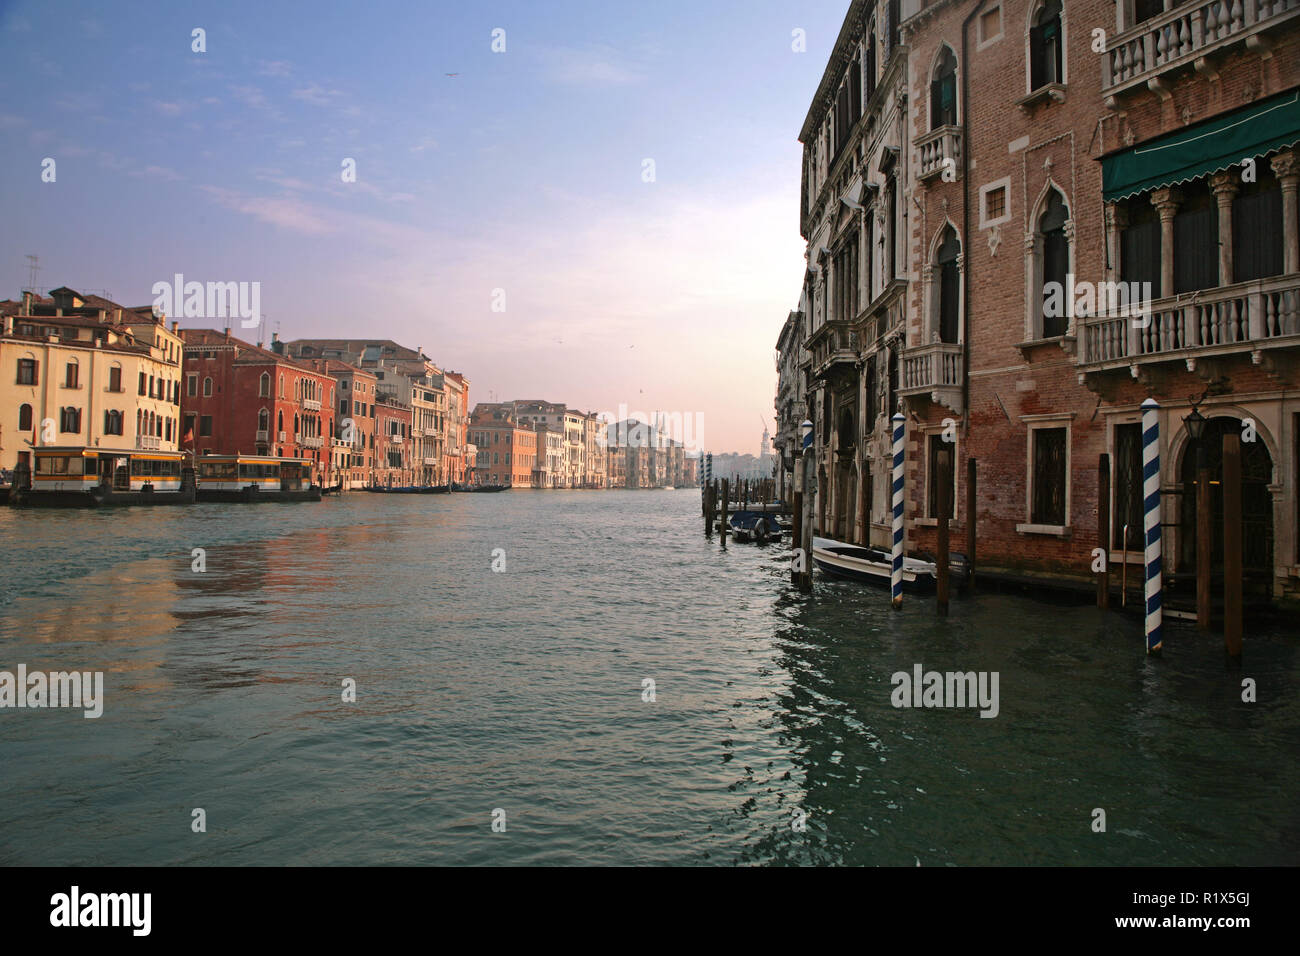 The Grand Canal at San Toma, with palaces lining the San Polo and San Marco waterfronts, Venice, Italy Stock Photo